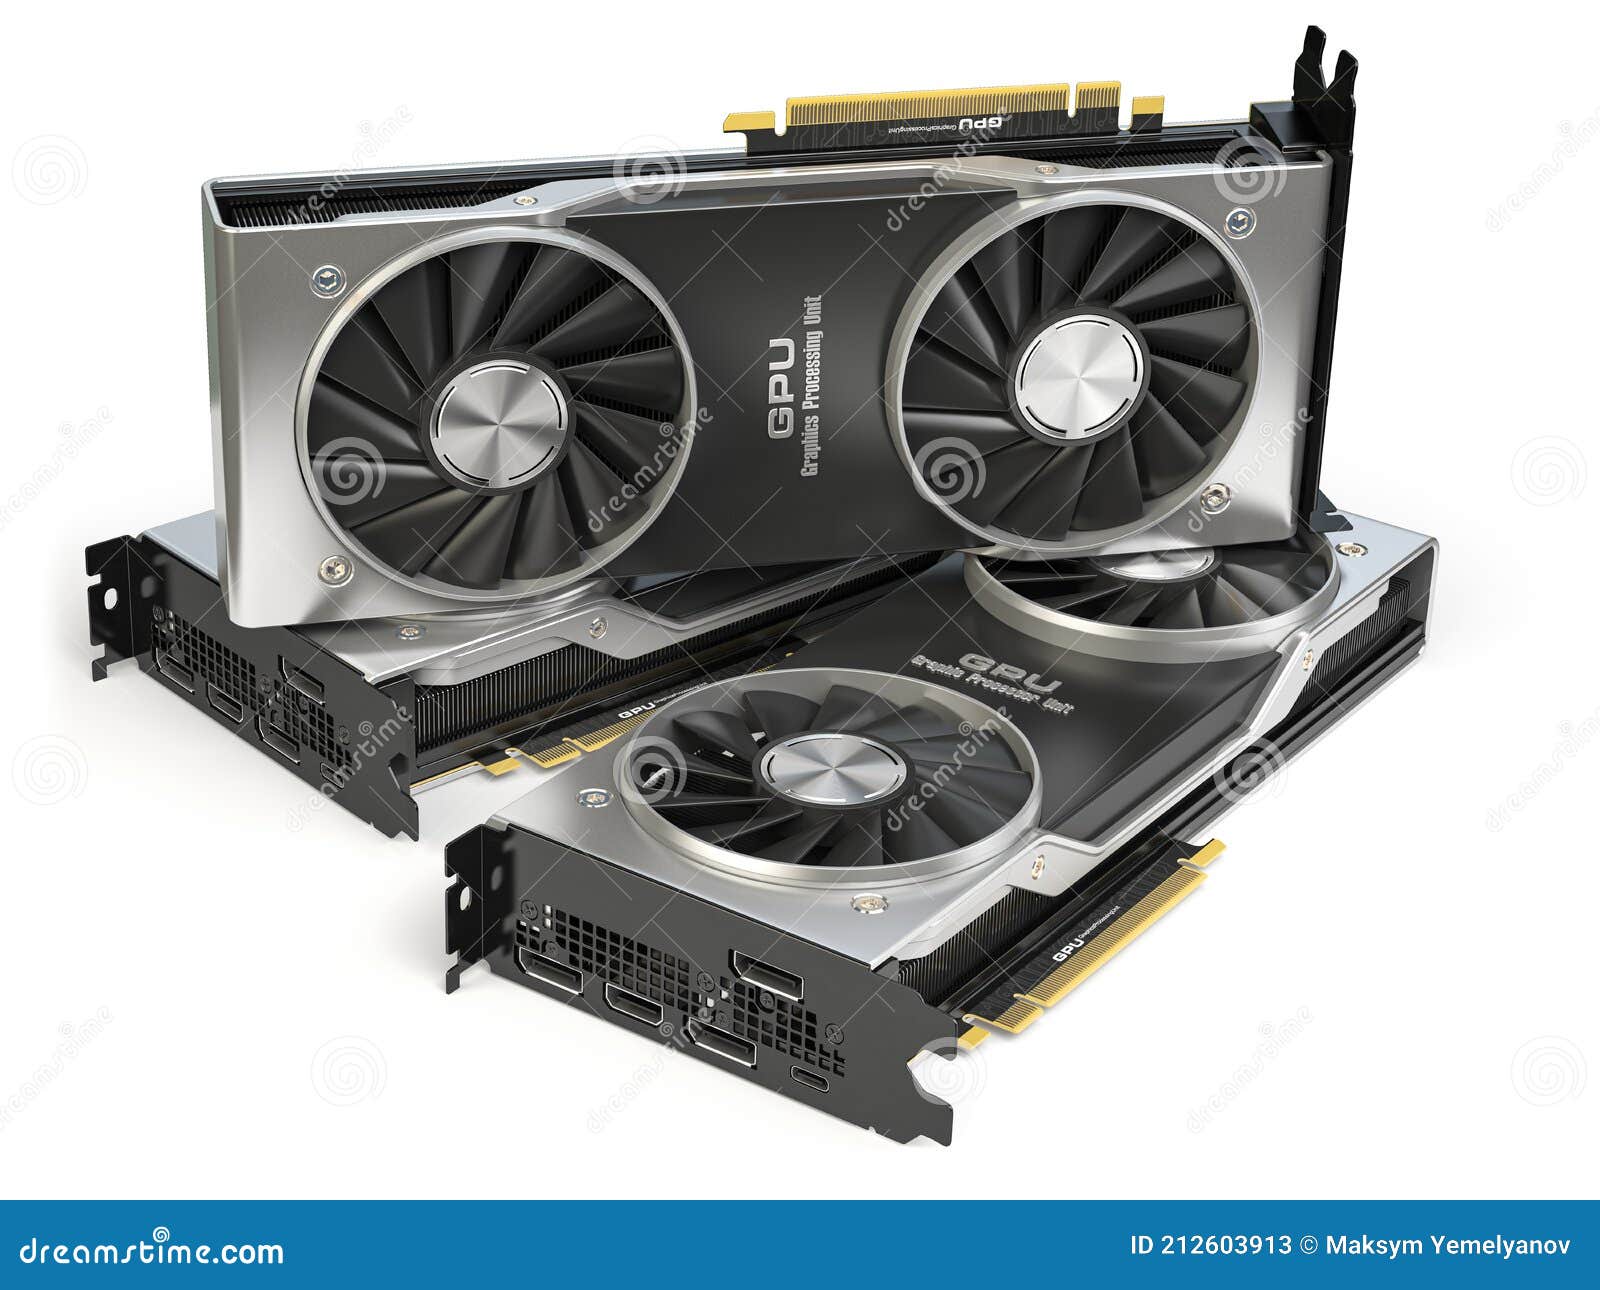 graphics cards. modern gaming  gpu graphics processing units  on white